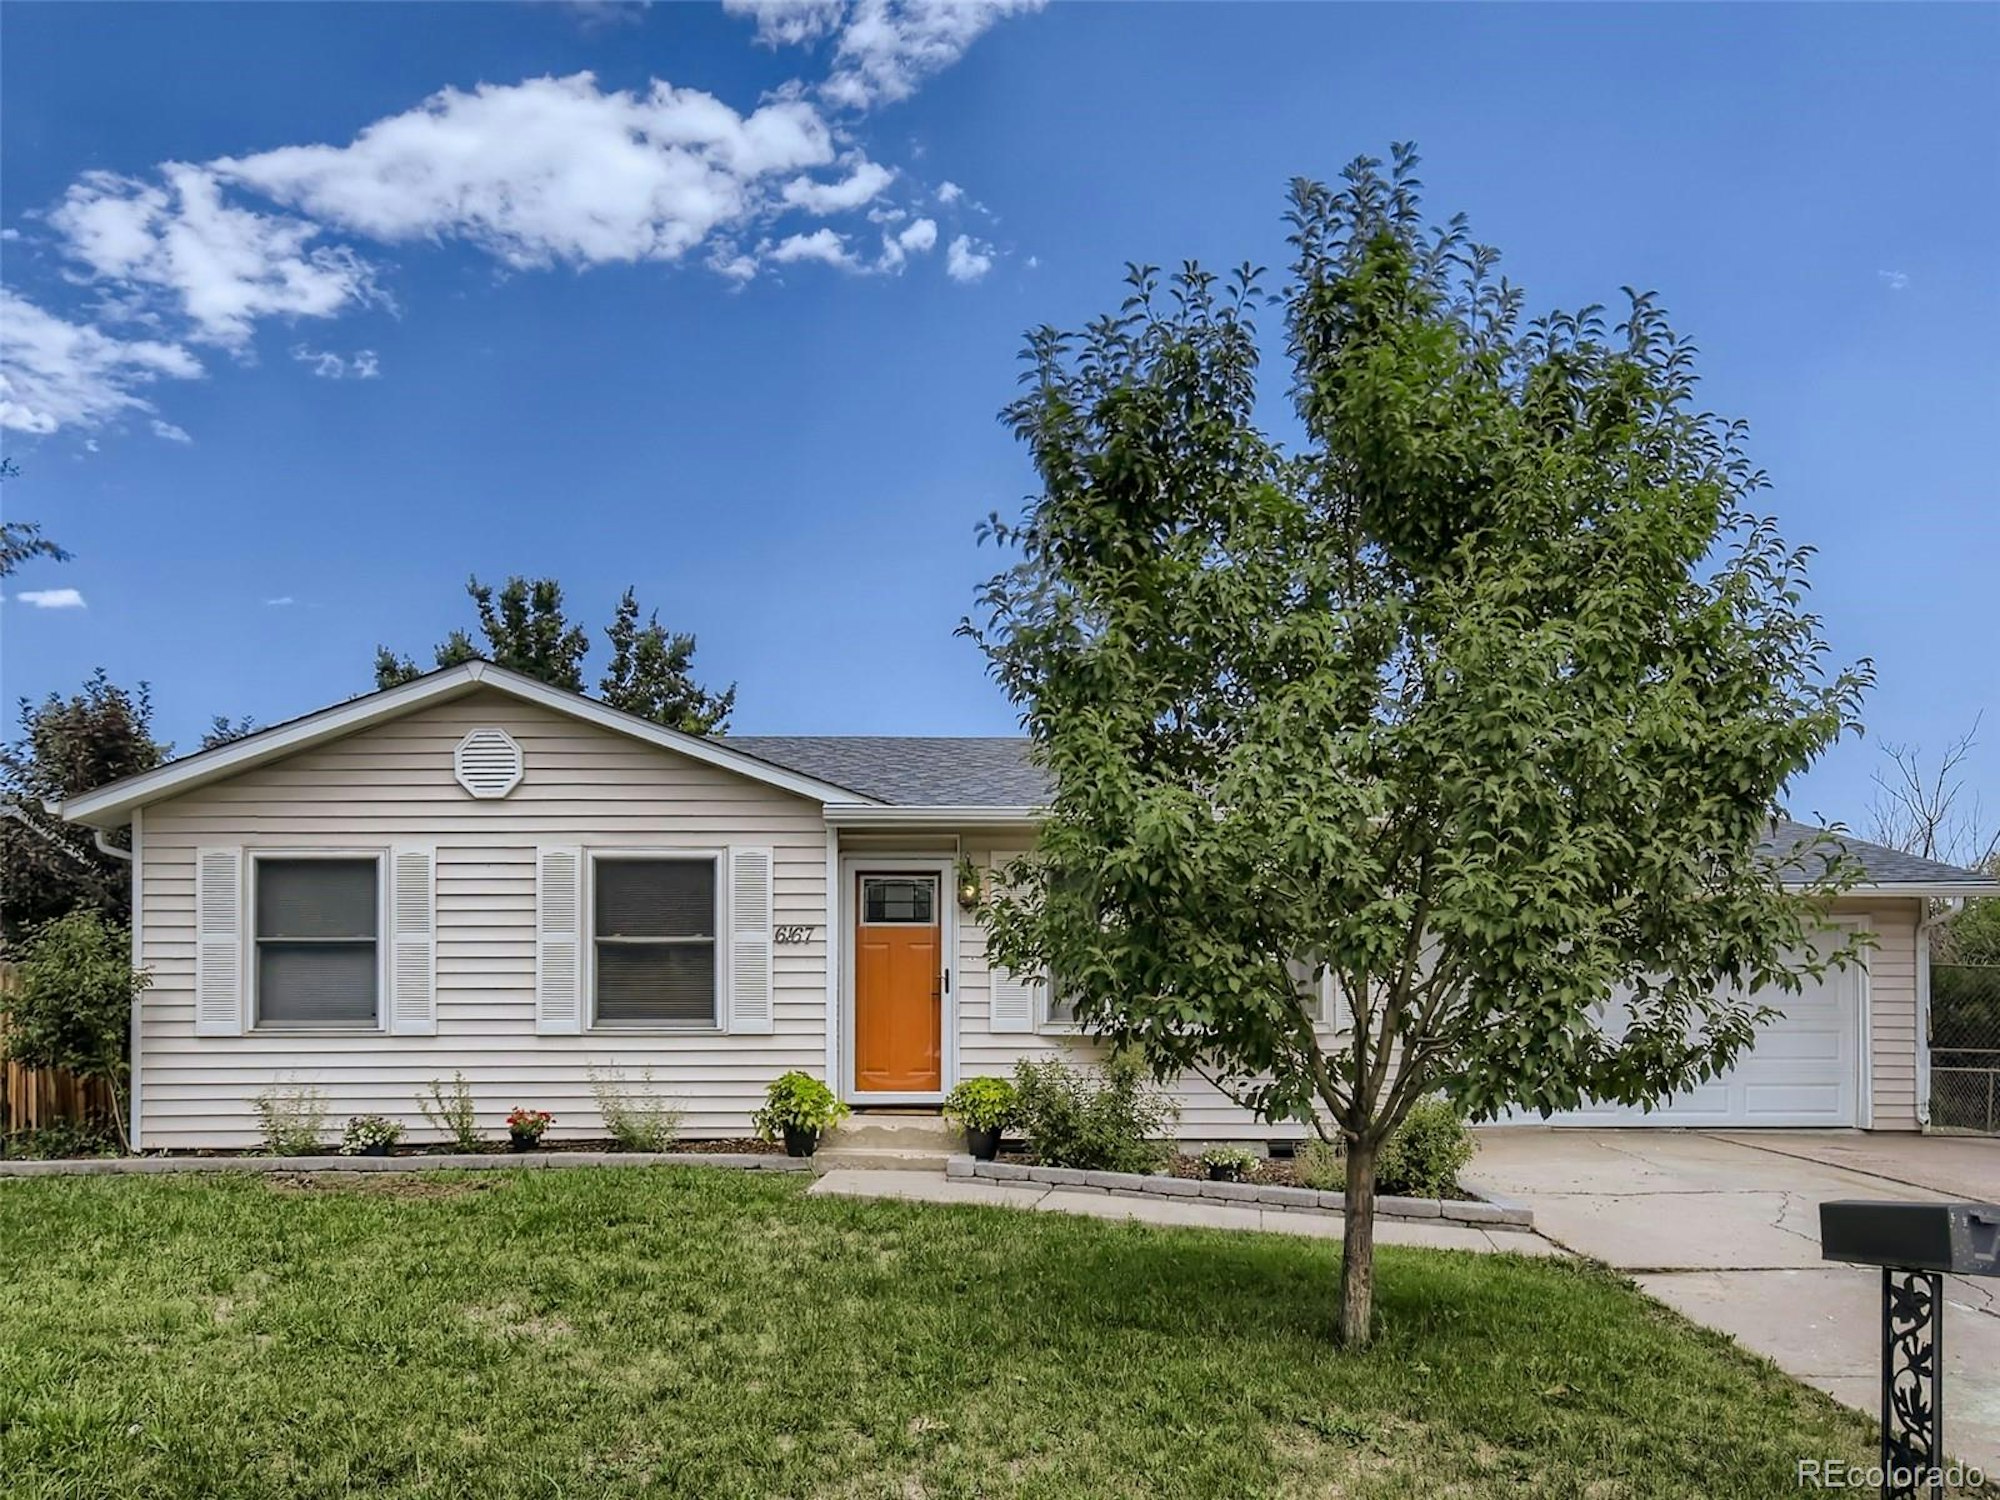 Photo 1 of 26 - 6167 W 65th Ave, Arvada, CO 80003